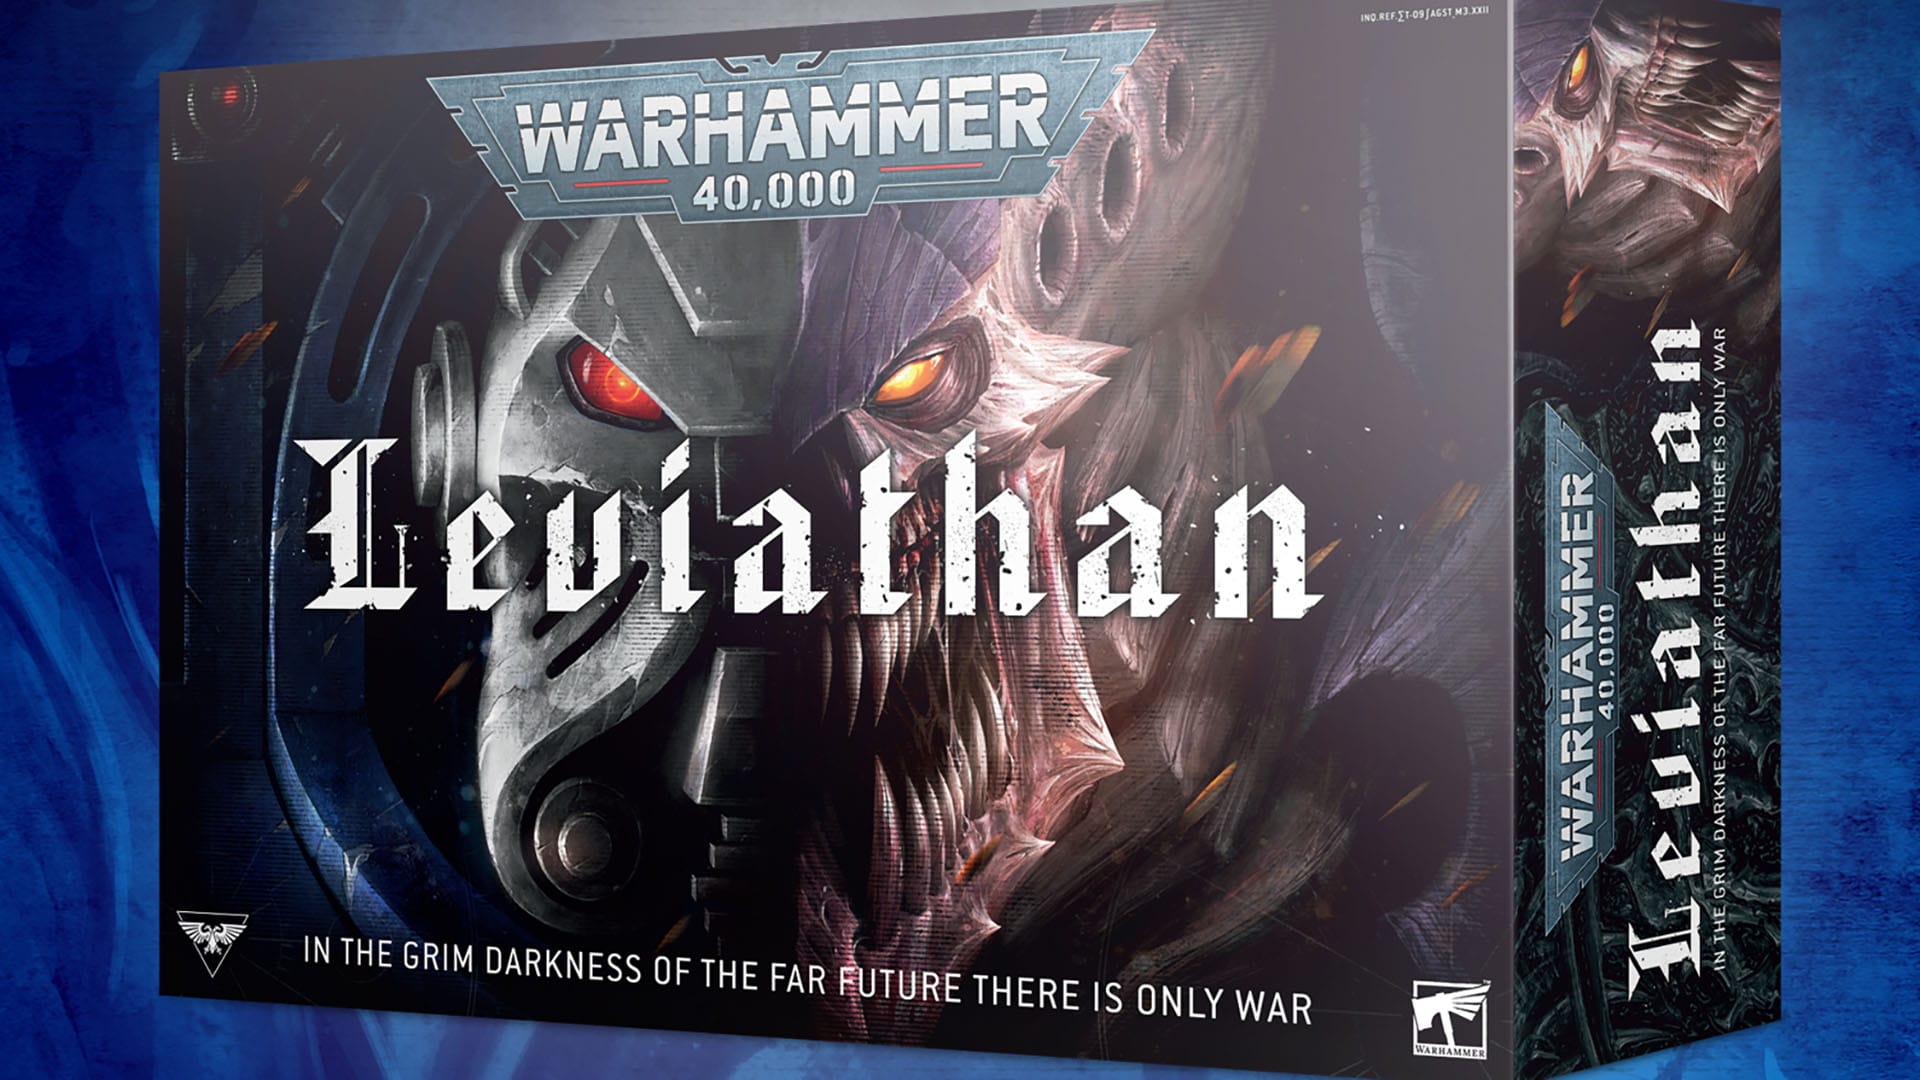 Warhammer 40K Reveals Massive Leviathan Boxed Set; Likely New Scale  Spin-Off Game Teased